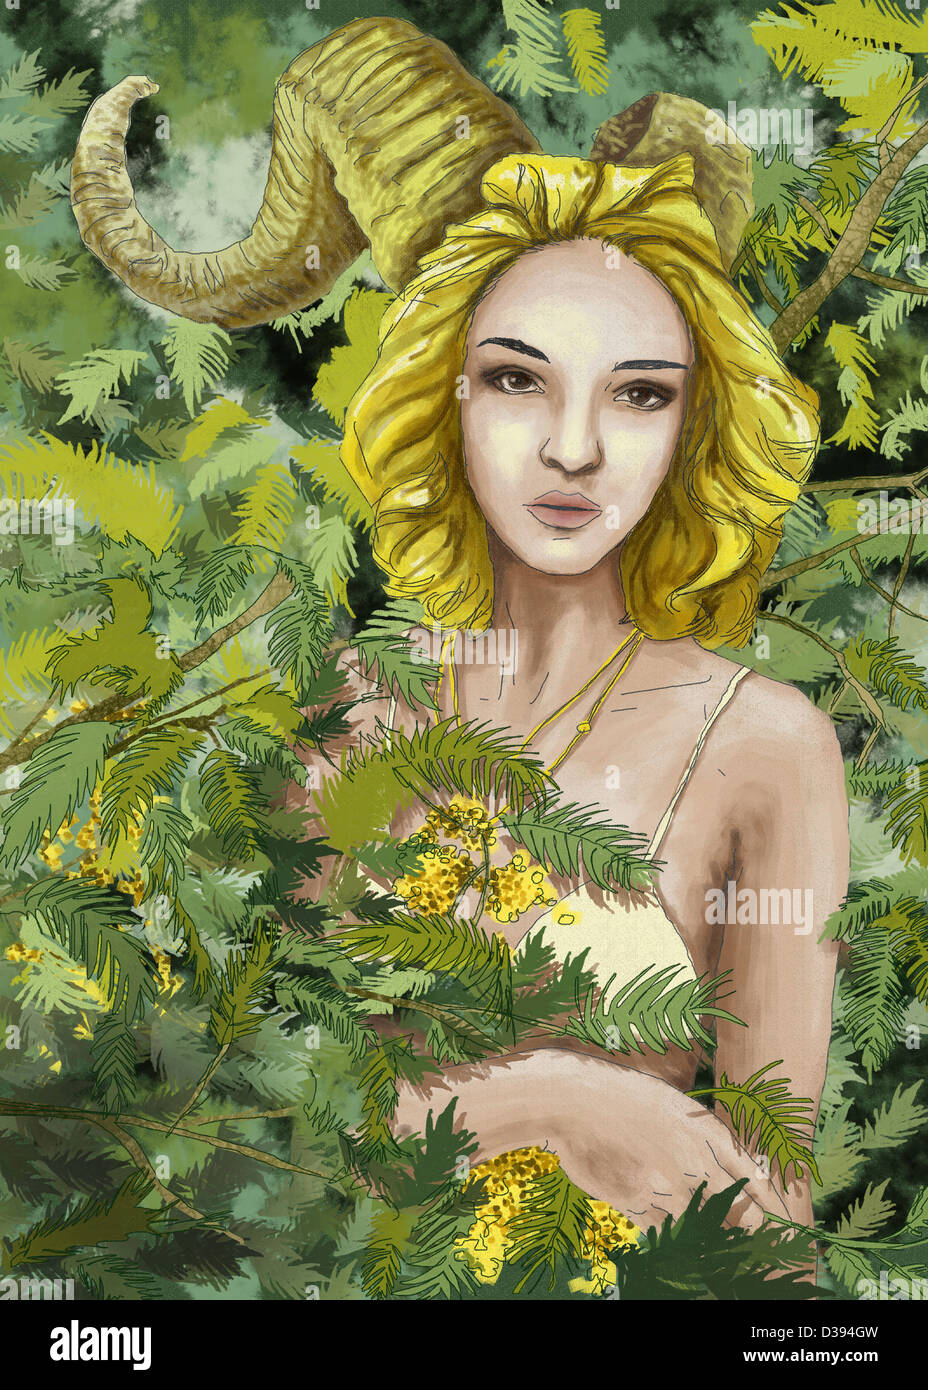 Illustrative image of young woman surrounded by bushes Stock Photo